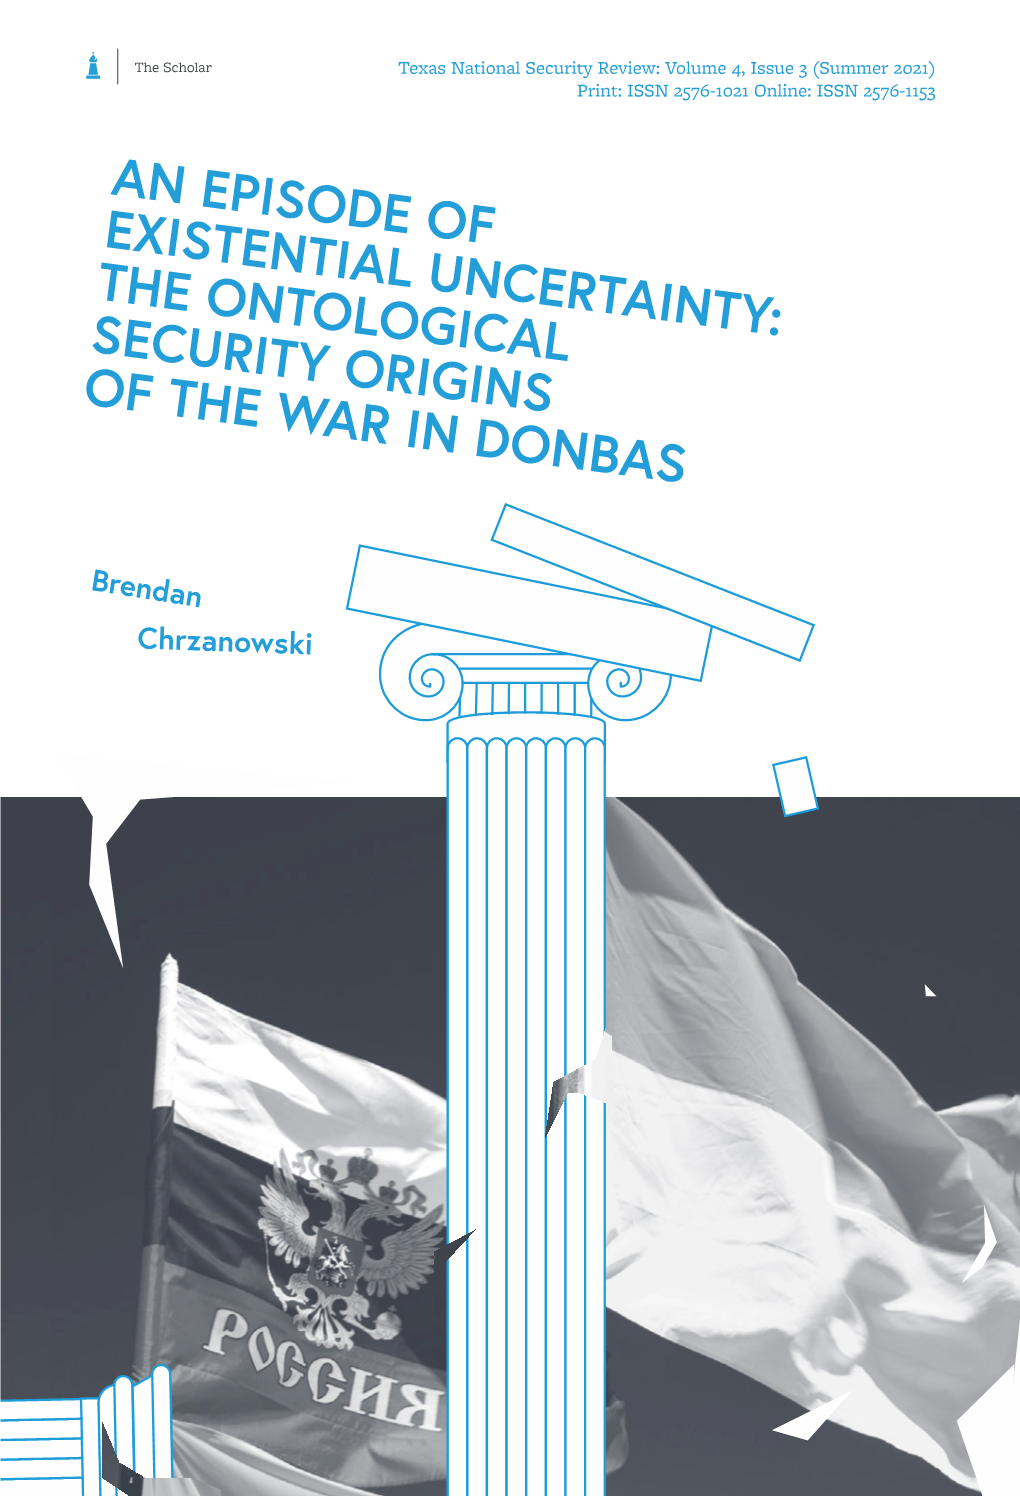 The Ontological Security Origins of the War in Donbas